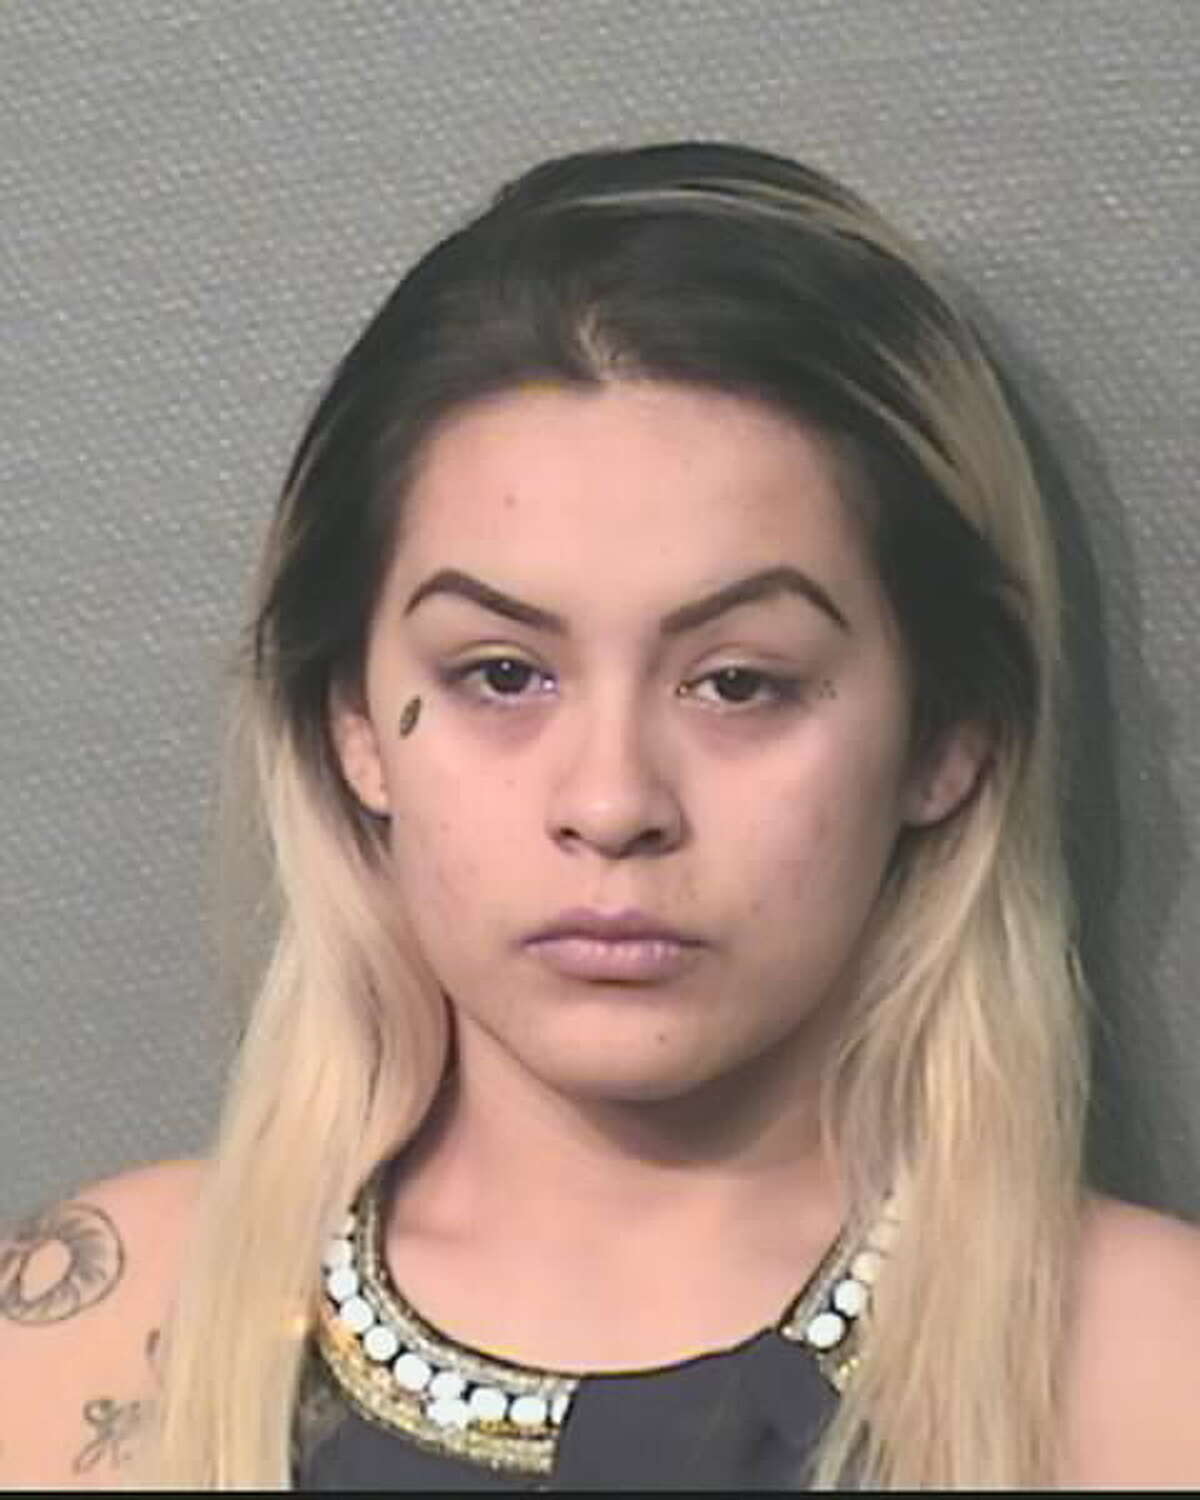 Adriana K. Alvarado, 23, was charged with prostitution, Sept. 17, 2015 in Houston.